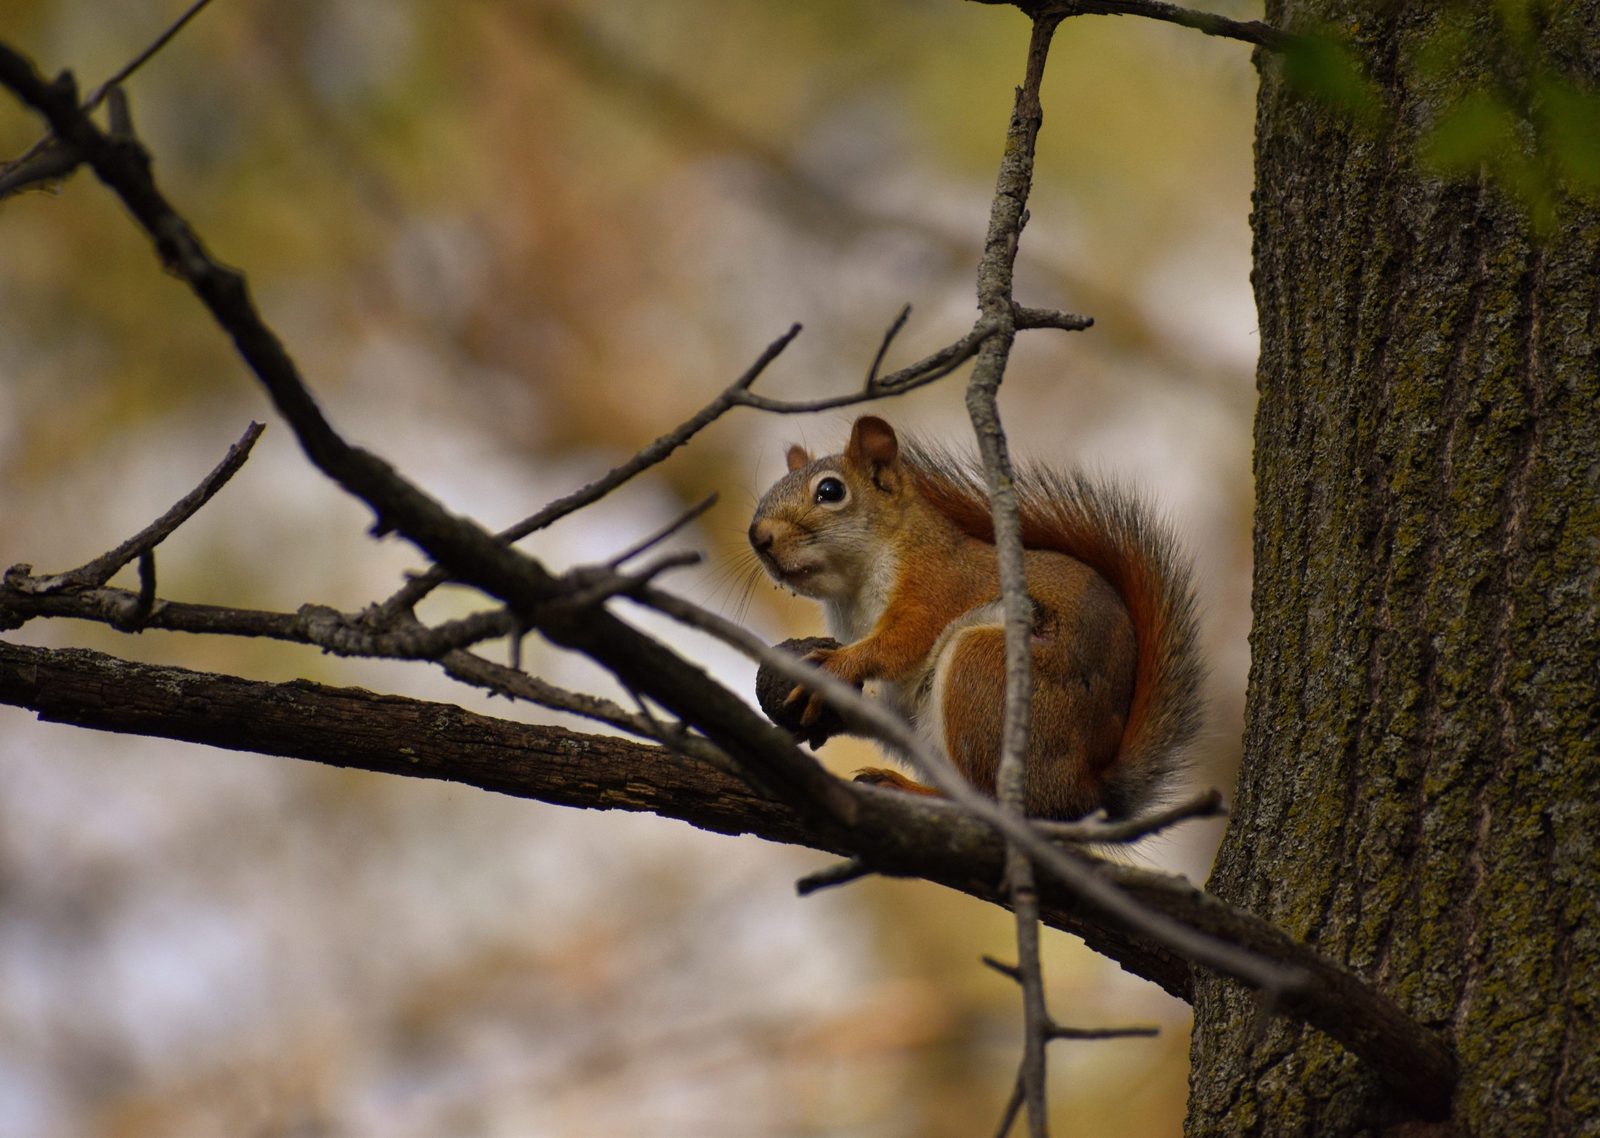 Did you know that squirrel sounds sound a LOT like bird calls? Searching for birds in the lower arb, I quickly looked up after hearing LOUD chattering above me. Turns out, it was a red squirrel enjoying an acorn treat!